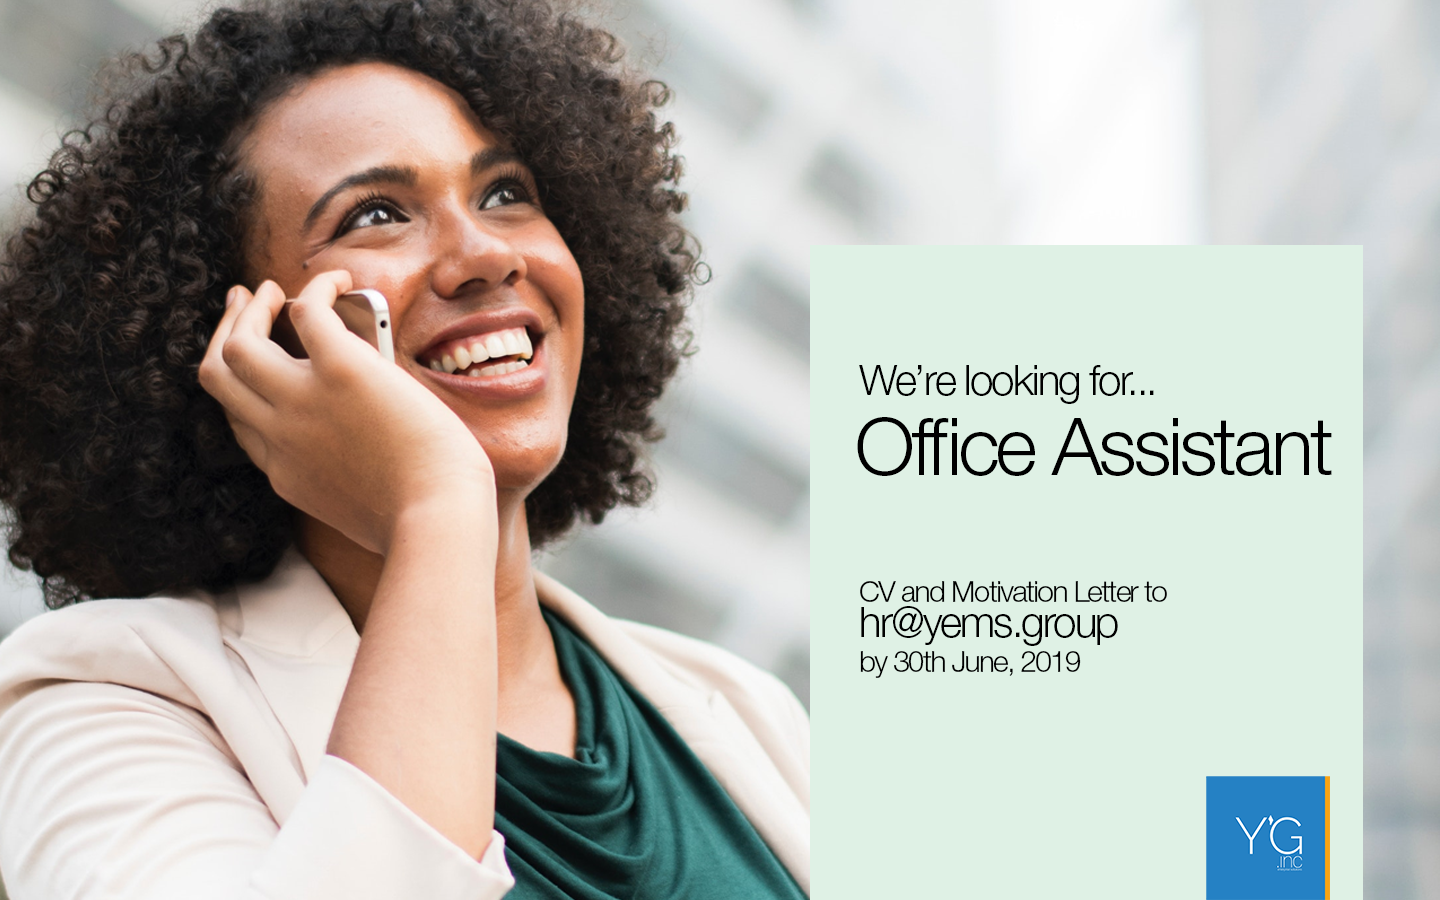 We're Looking for an Office Assistant